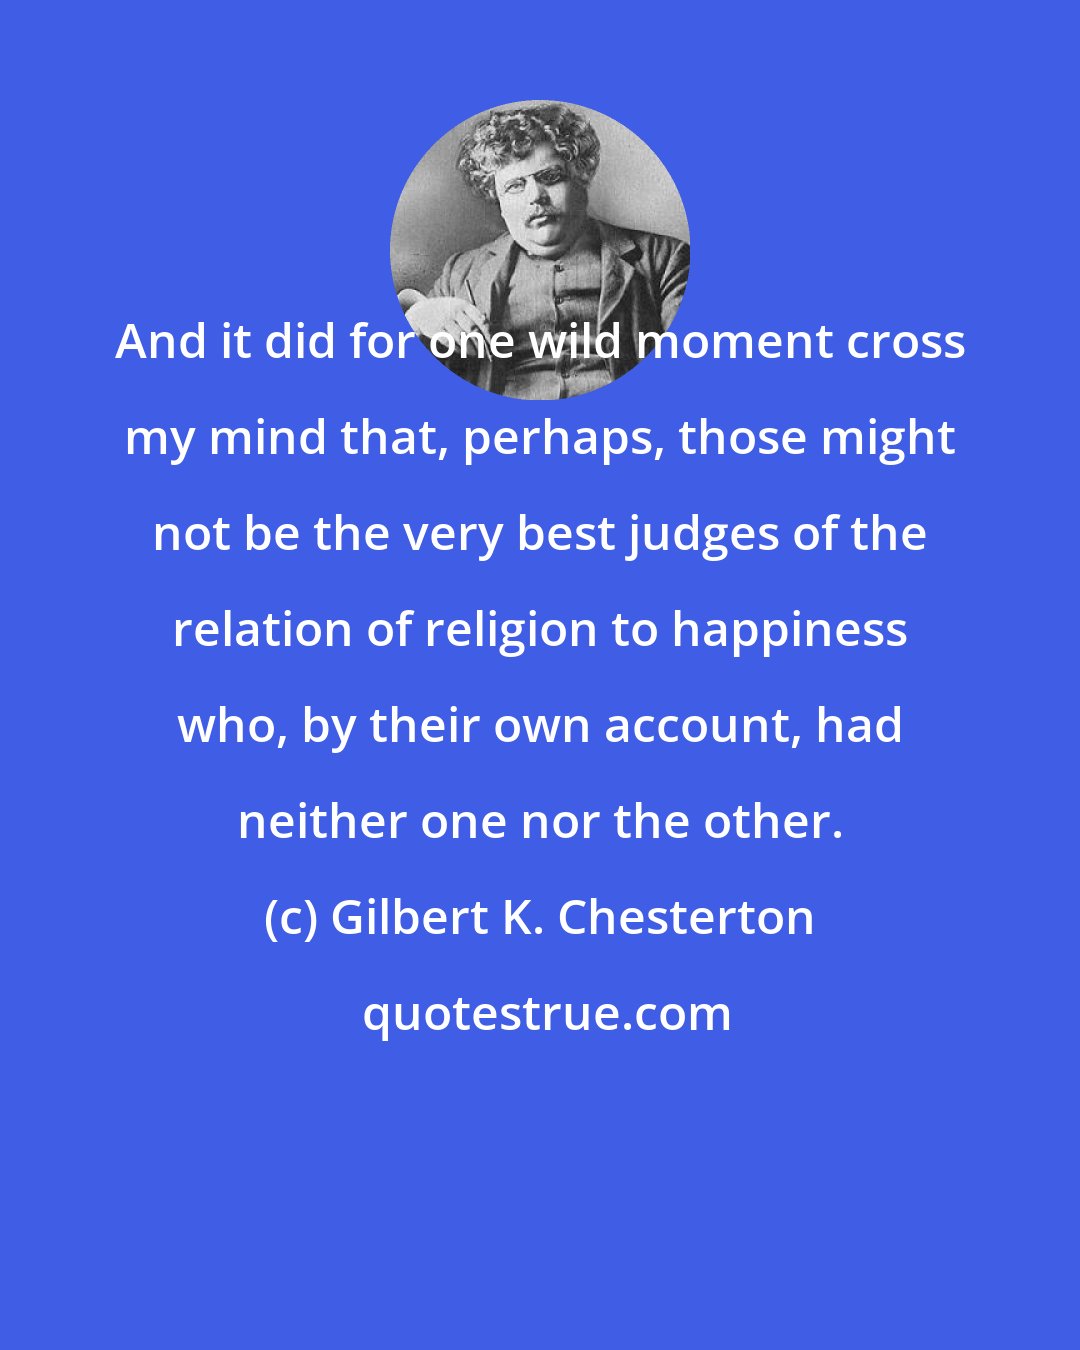 Gilbert K. Chesterton: And it did for one wild moment cross my mind that, perhaps, those might not be the very best judges of the relation of religion to happiness who, by their own account, had neither one nor the other.